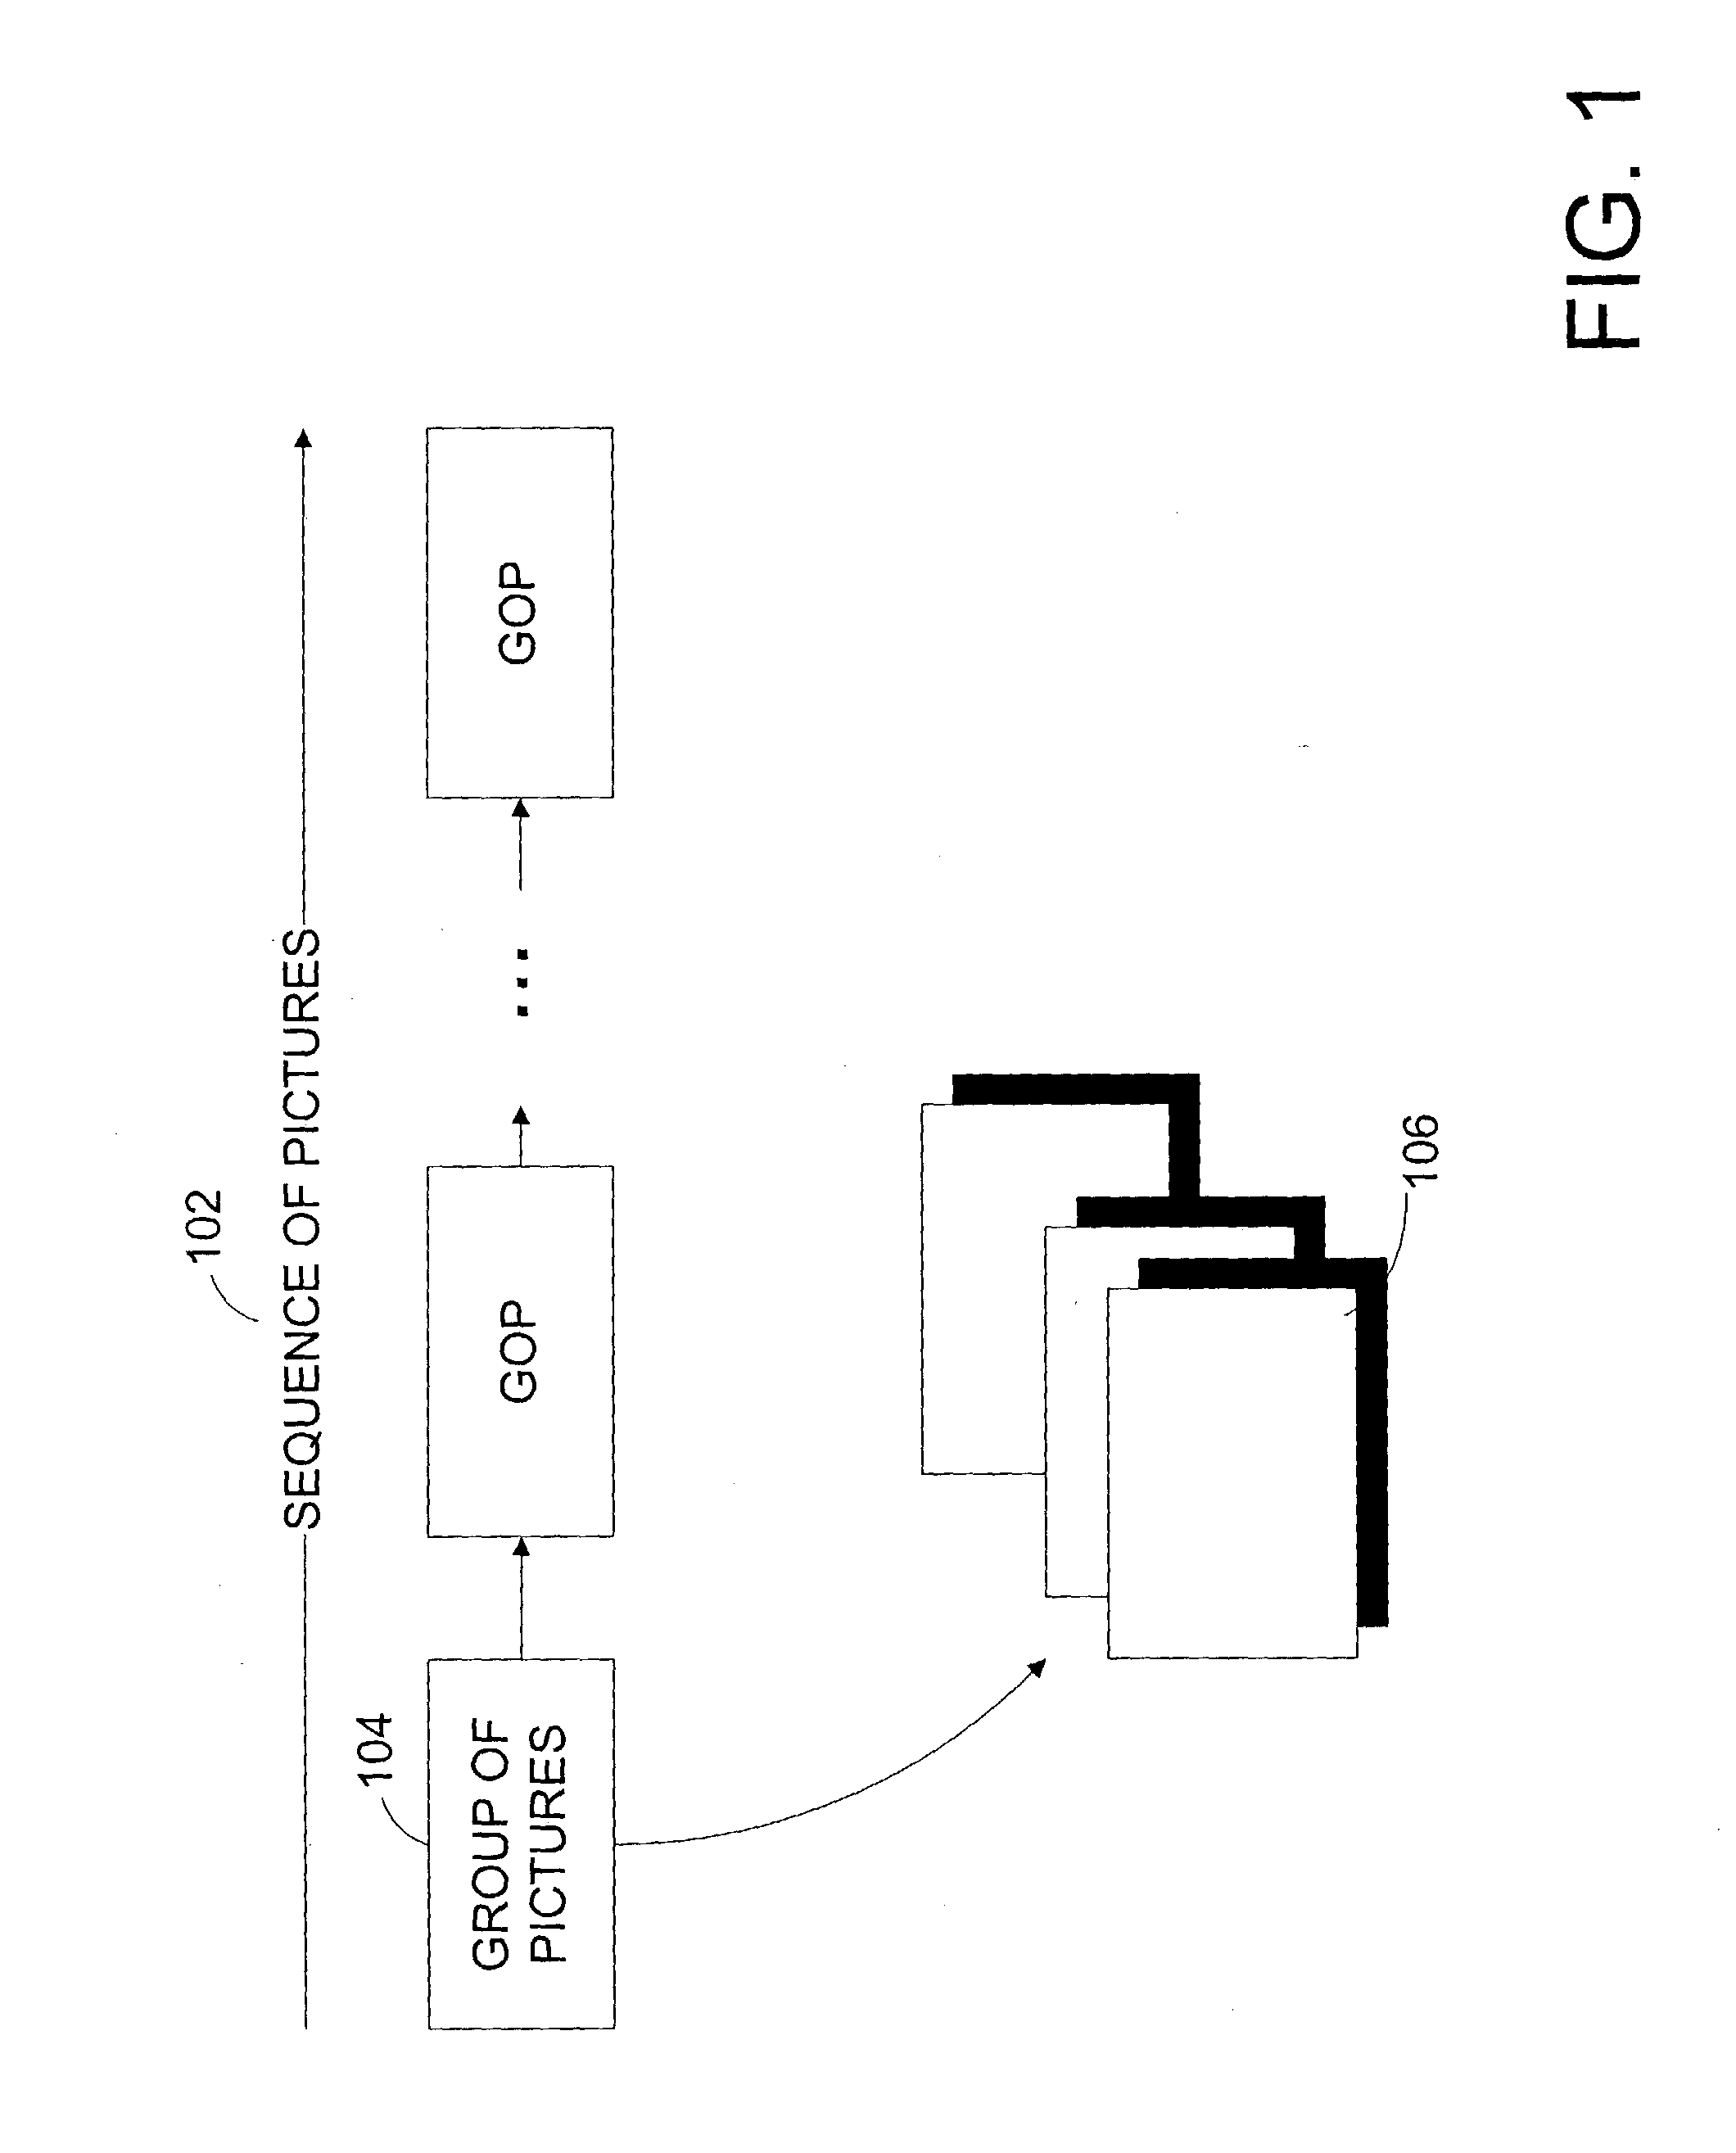 Systems and methods for resetting rate control state variables upon the detection of a scene change within a group of pictures